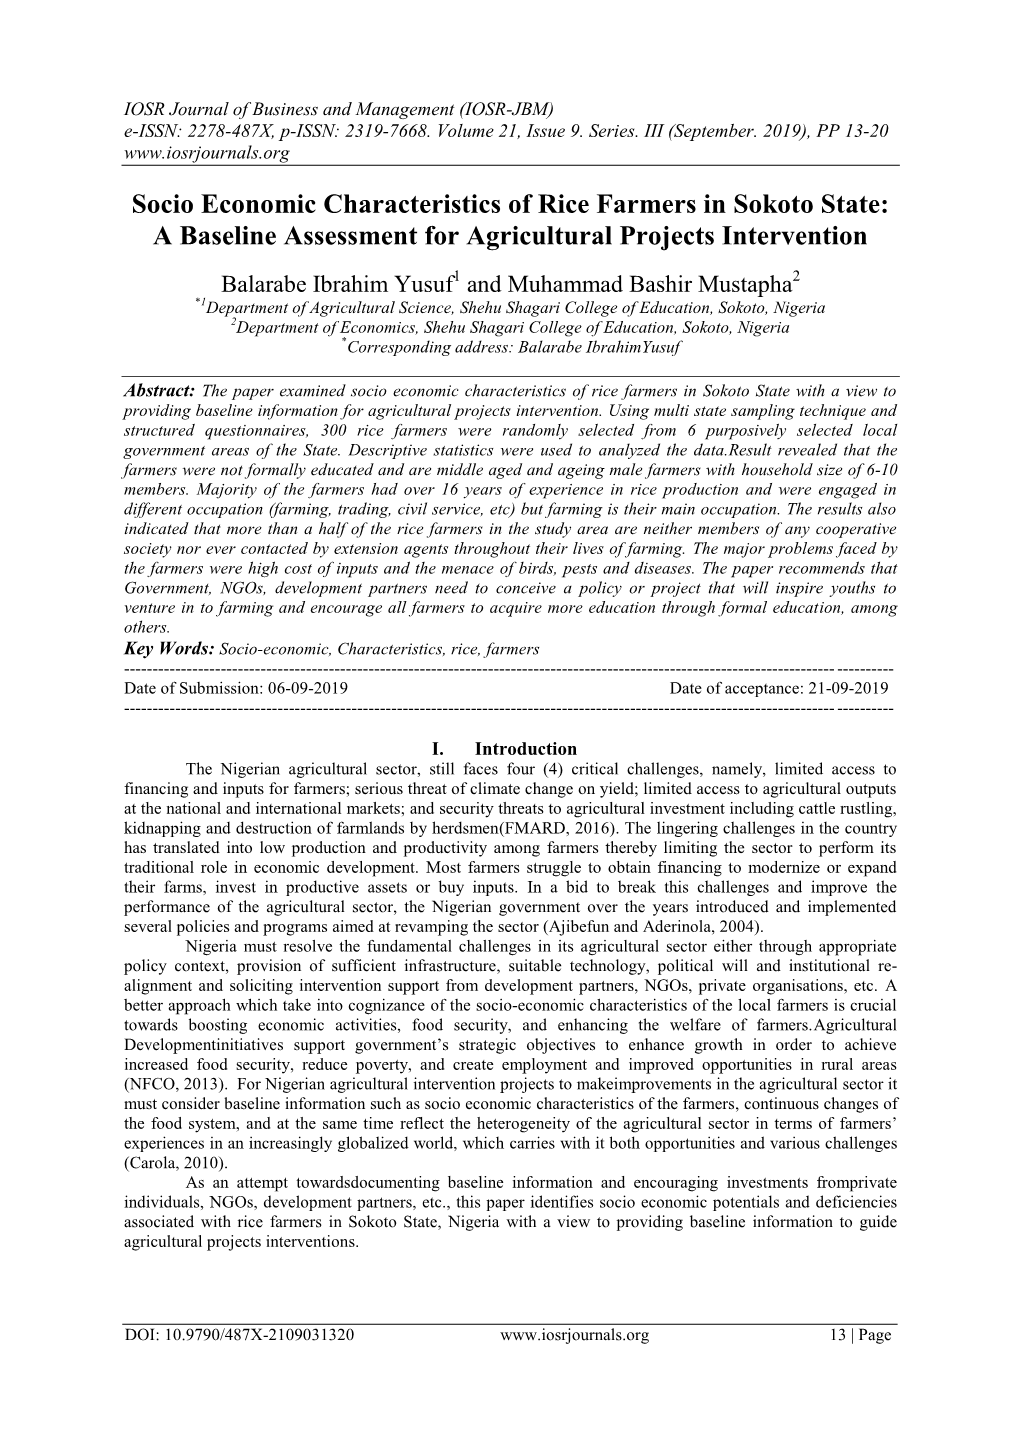 Socio Economic Characteristics of Rice Farmers in Sokoto State: a Baseline Assessment for Agricultural Projects Intervention